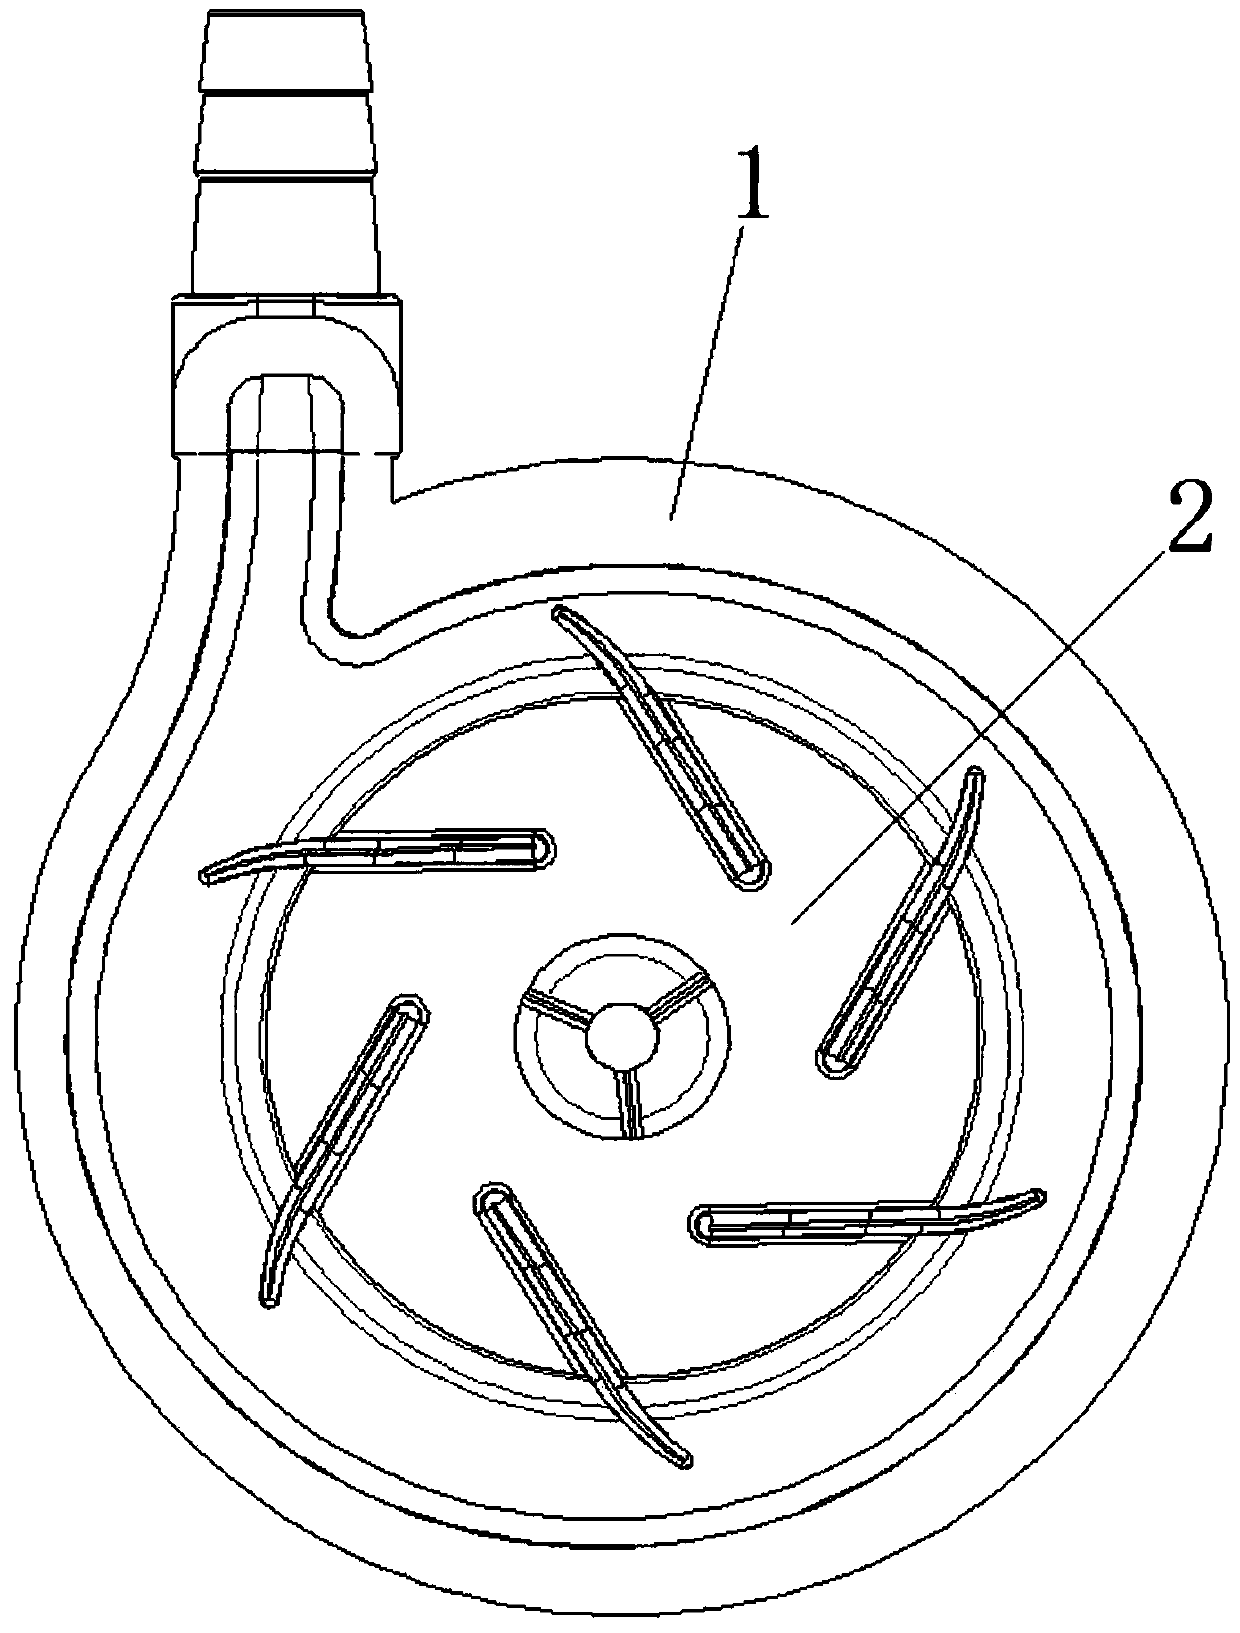 Centrifugal blood pump which rotates stably